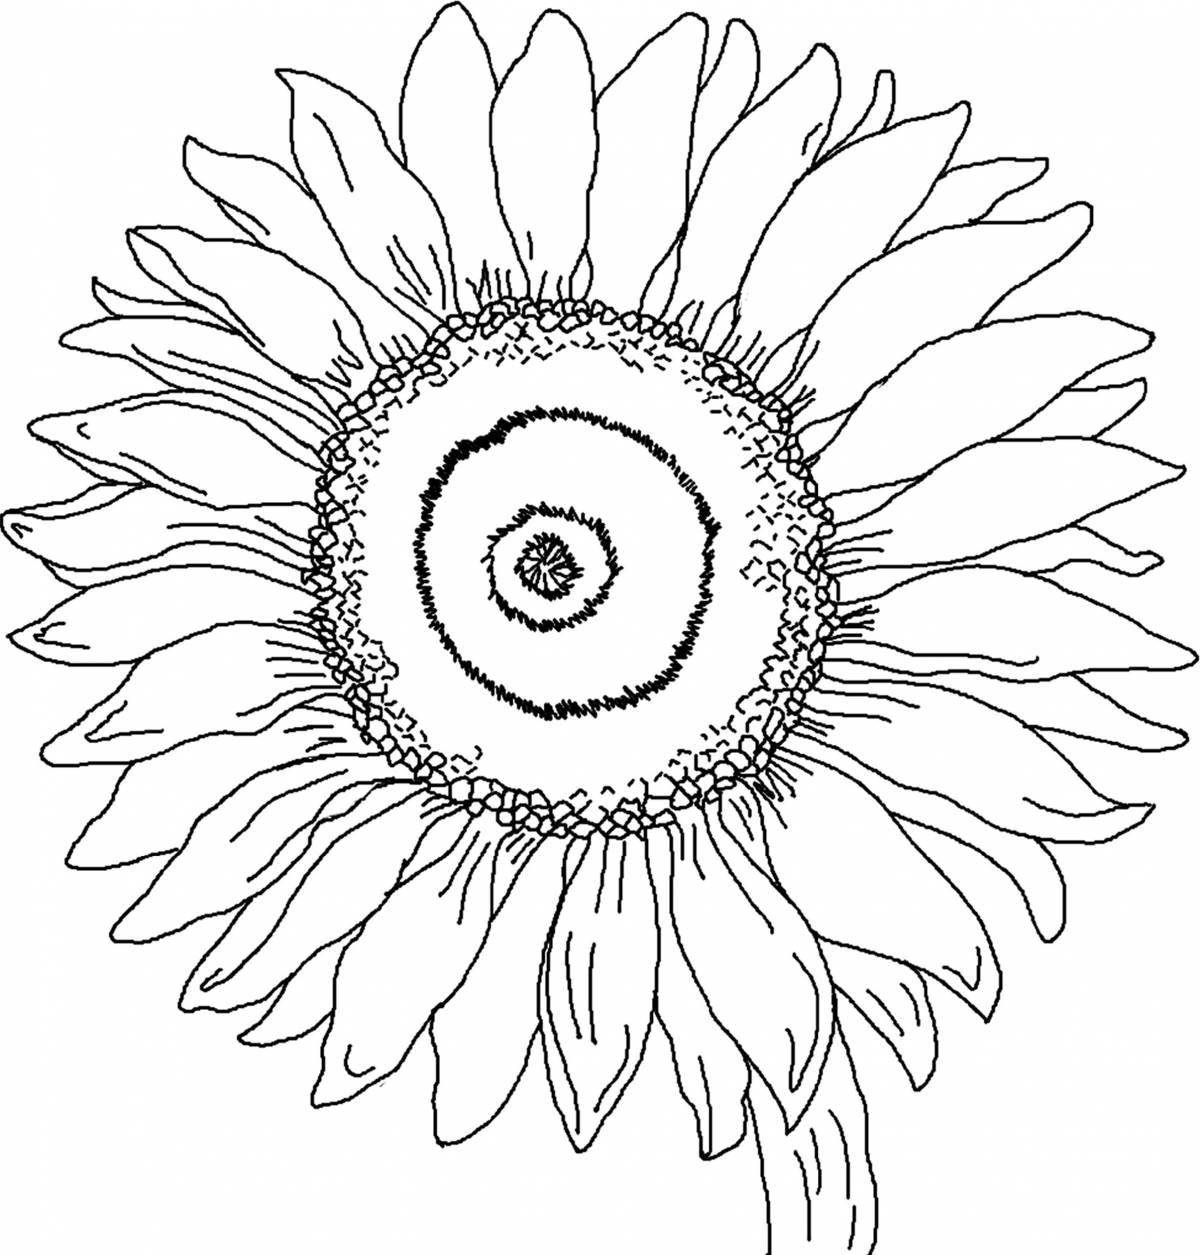 Attractive sunflower coloring book for kids